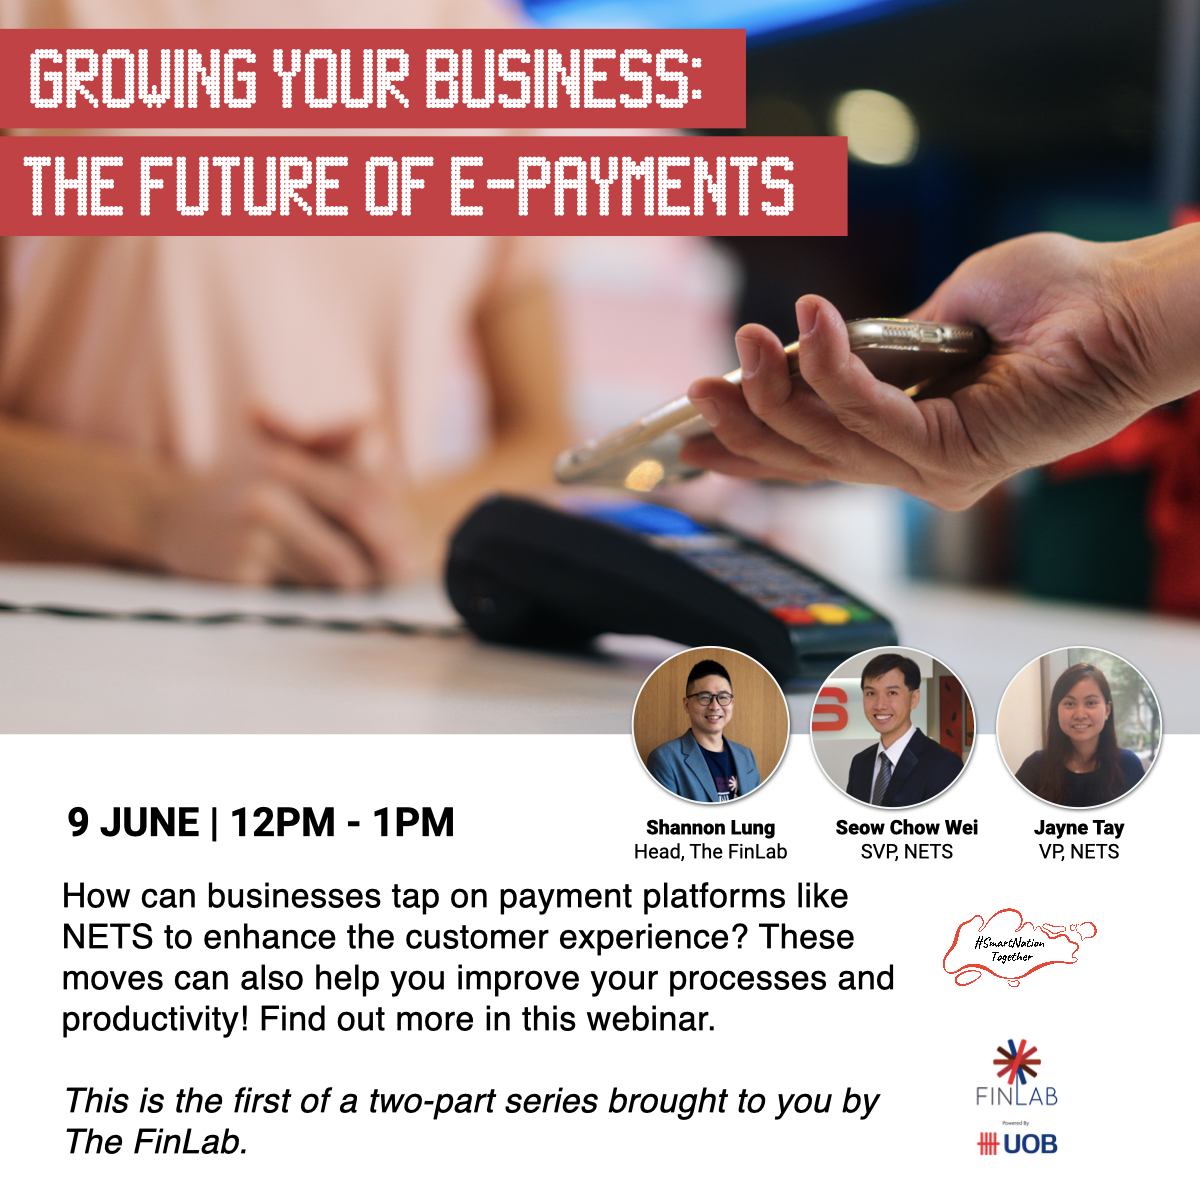 Free webinar on e-payments for businesses